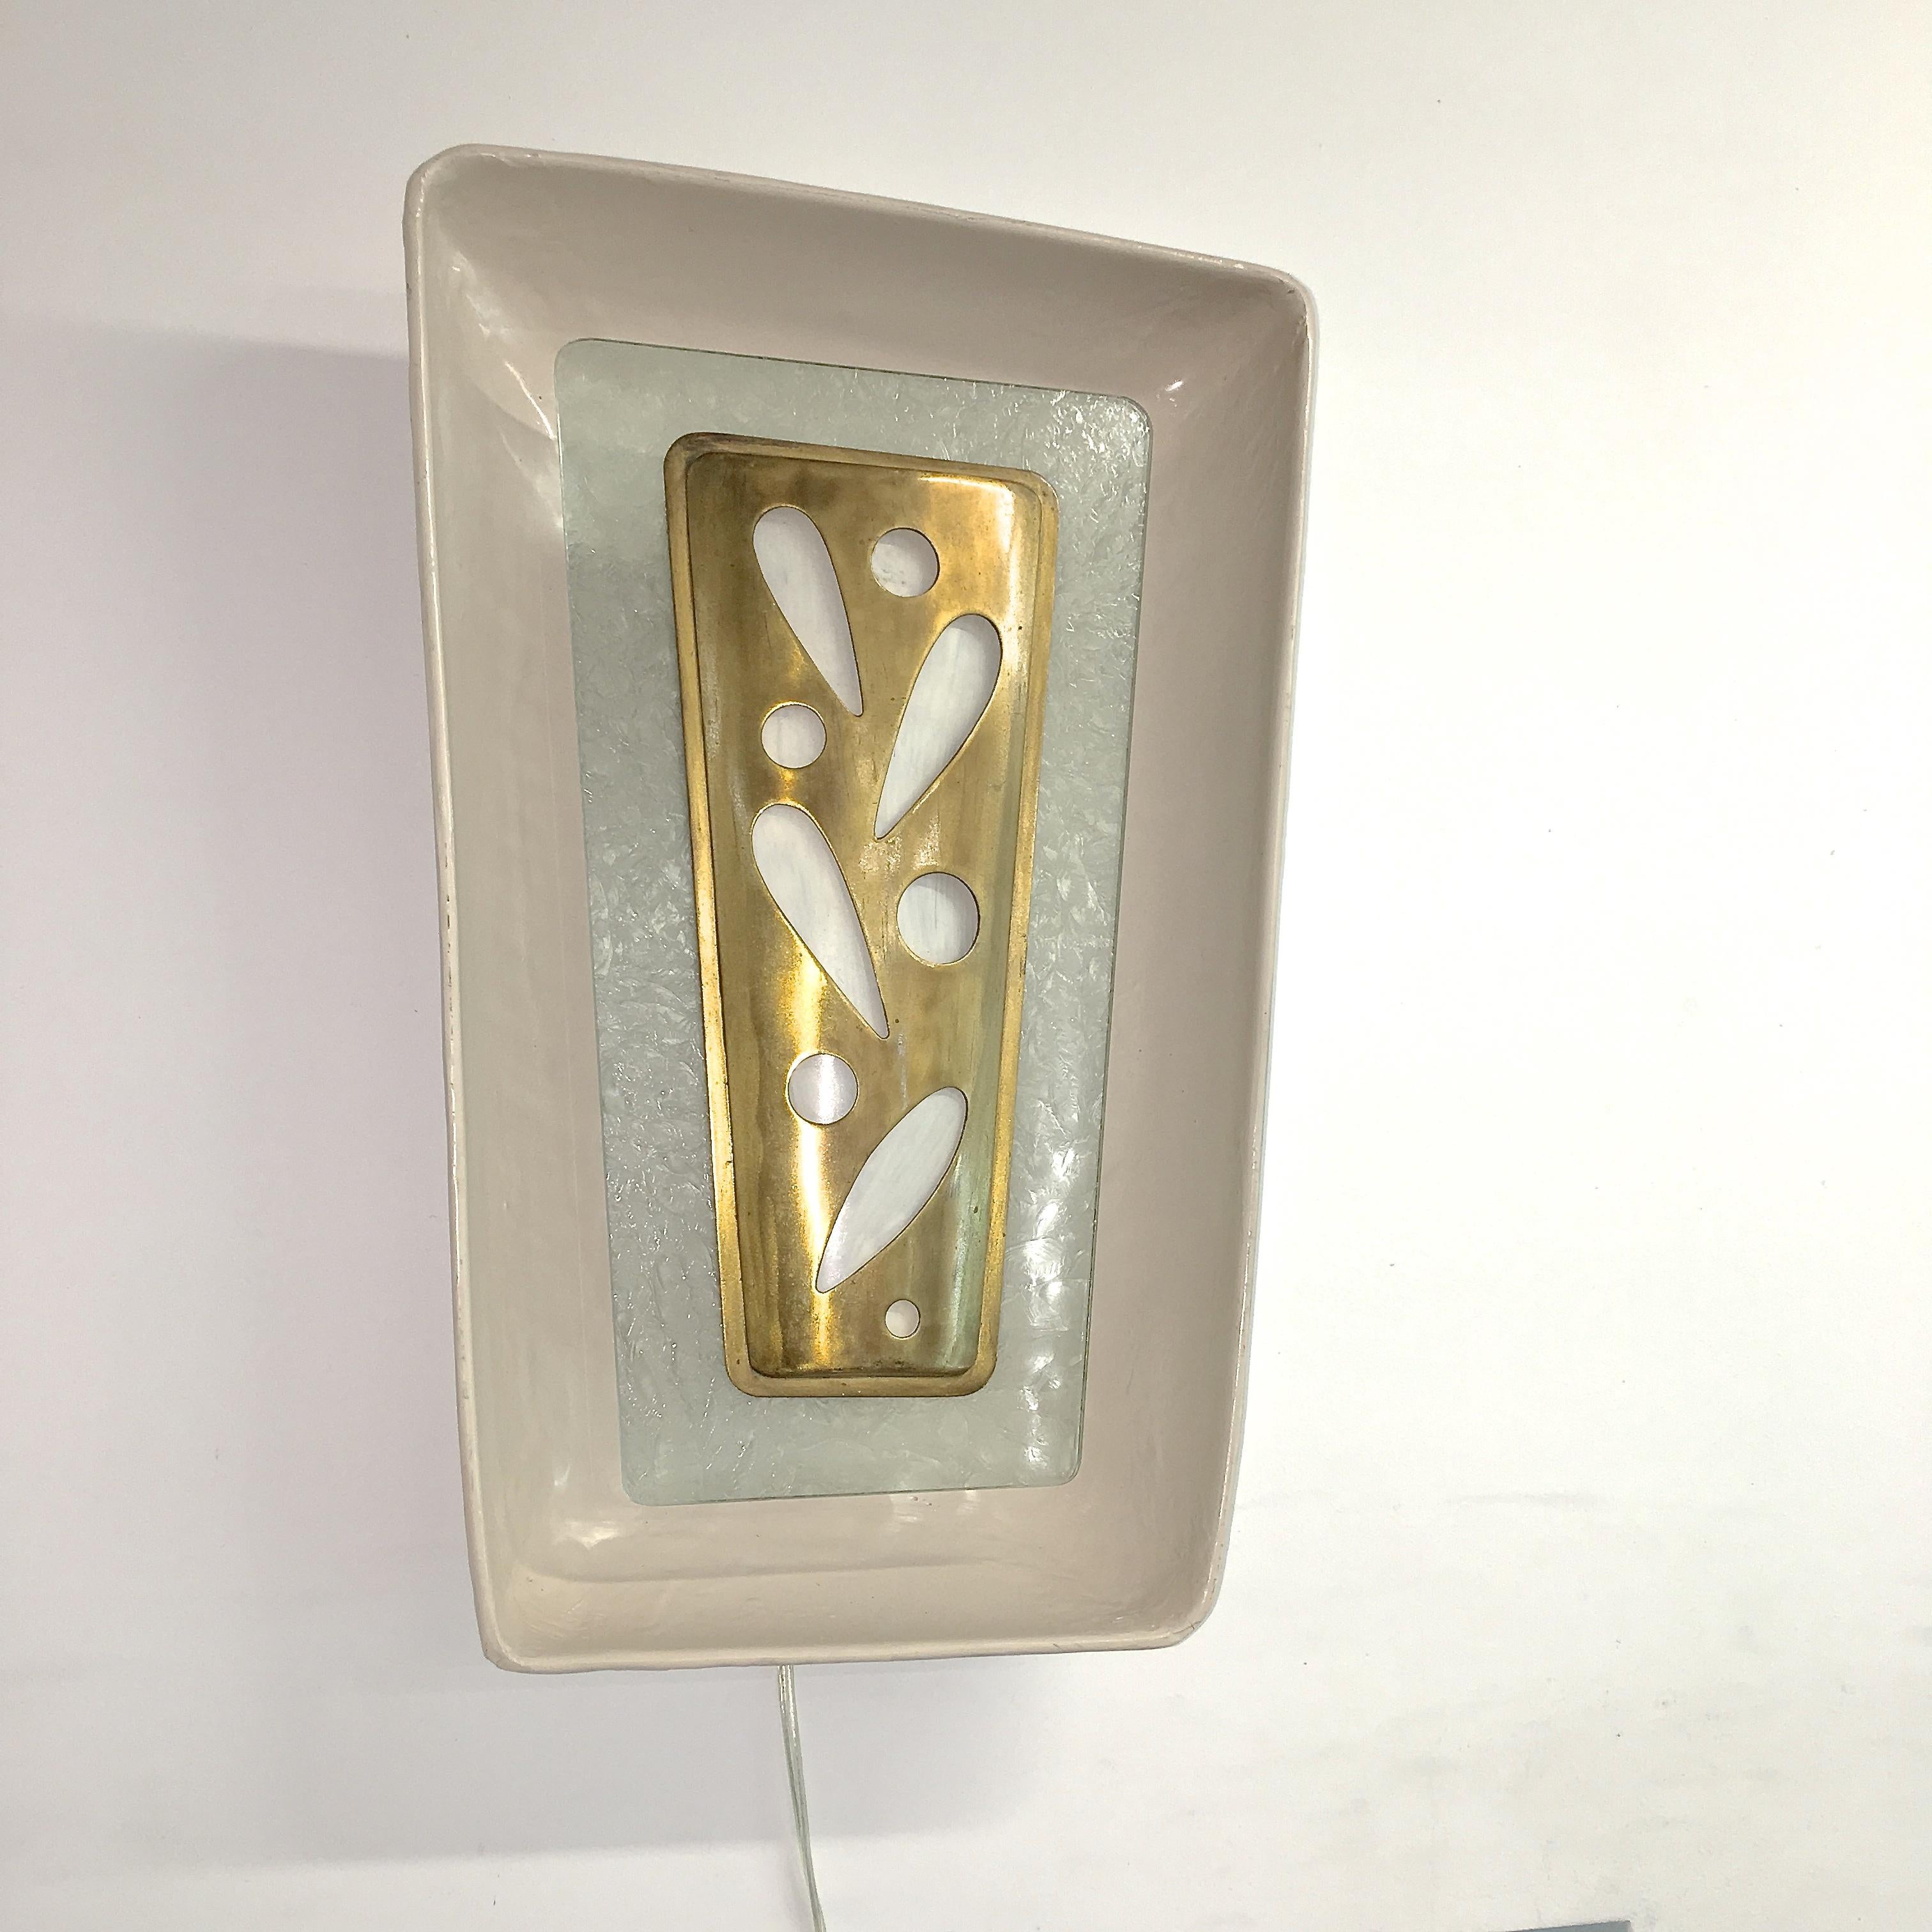 Gio Ponti Wall Sconce from the m/s Augustus Italian Ocean Liner 1951 For Sale 7